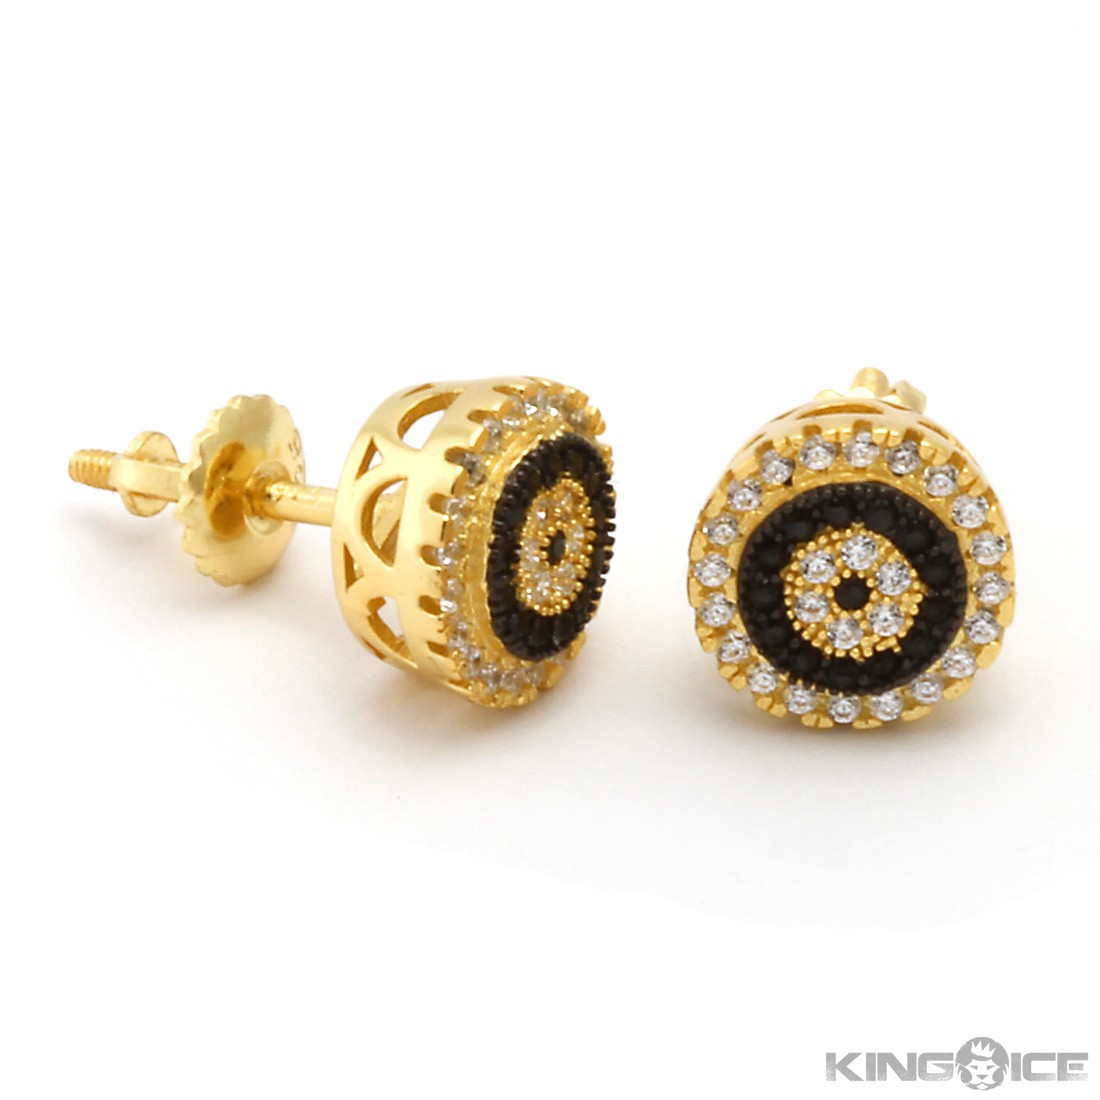 King Ice 14K Gold Round Cz Earrings